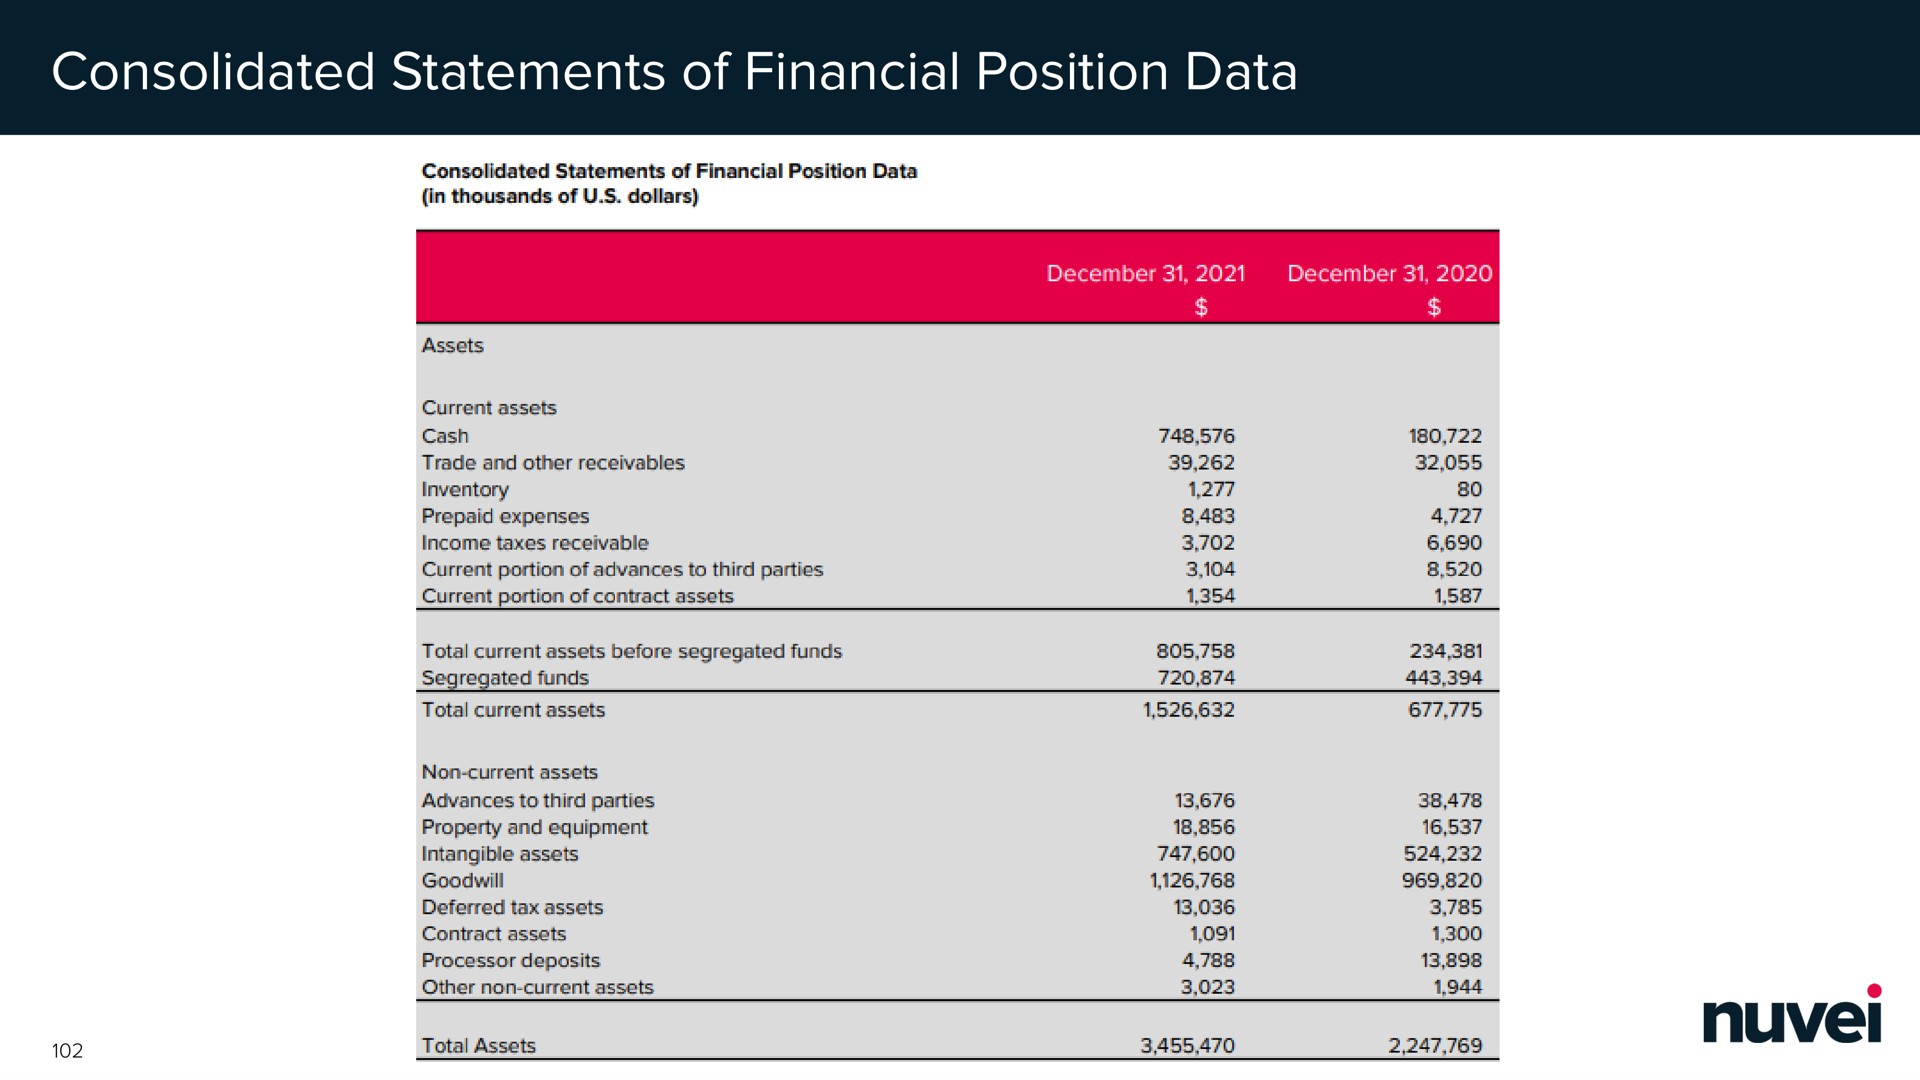 consolidated statements of financial position data | Nuvei